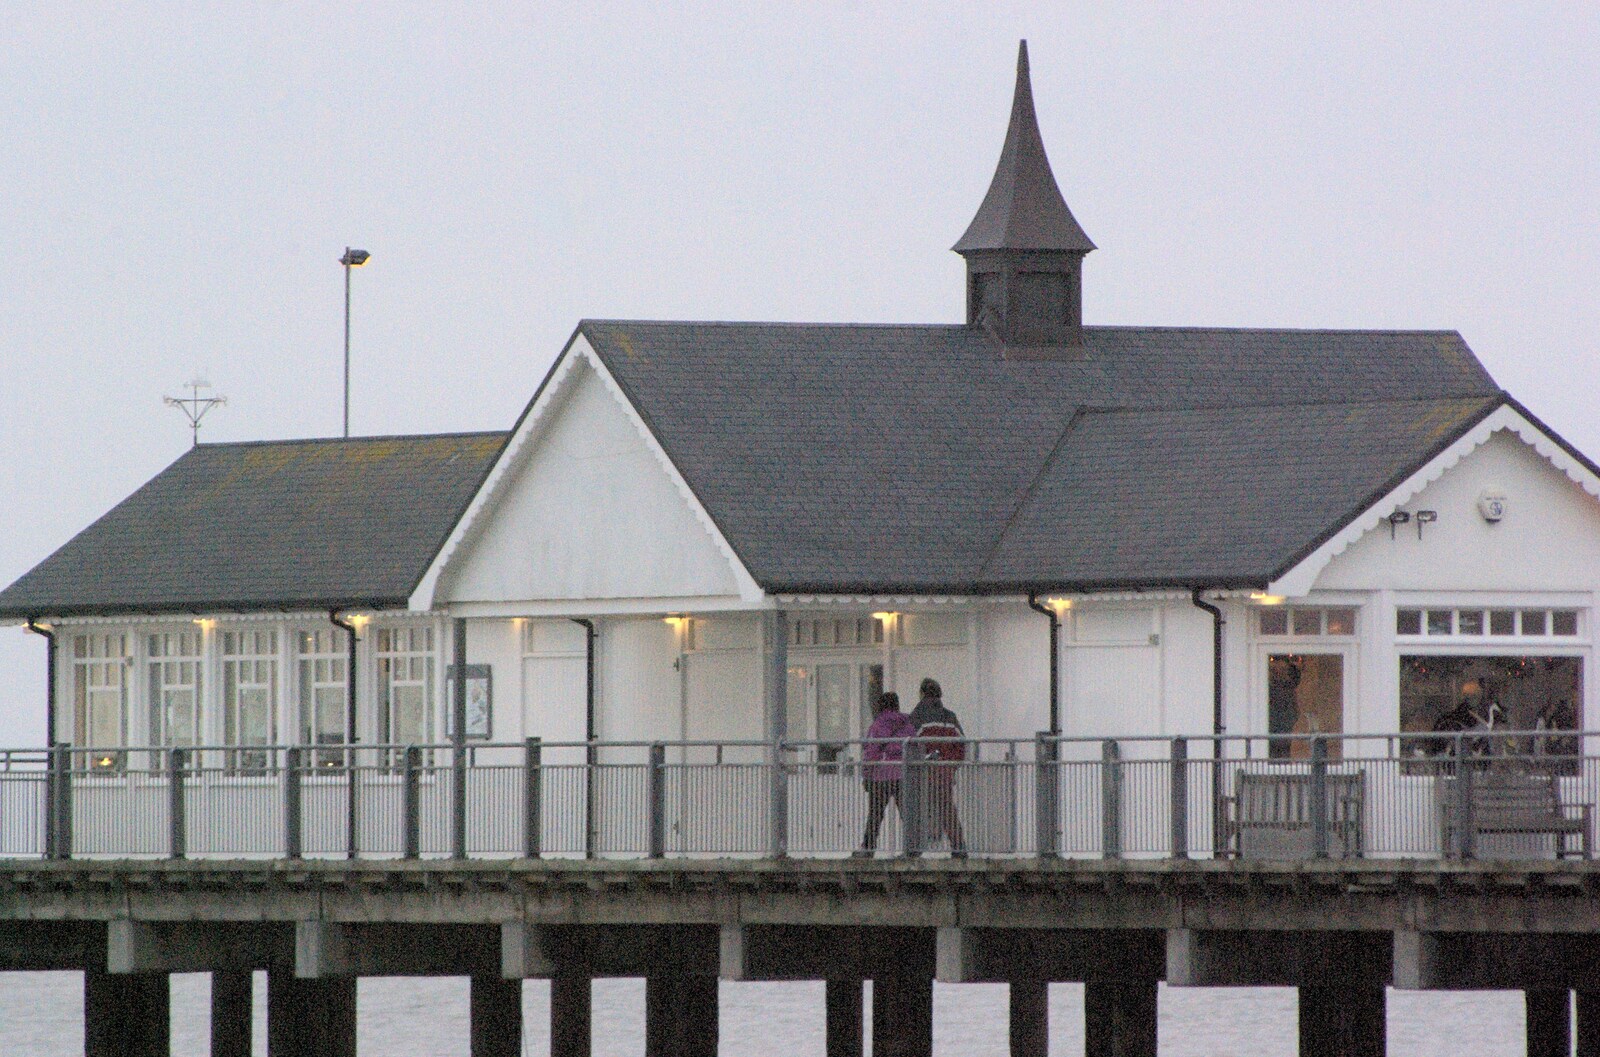 New Year's Day, and The Miserable Rich at the Arts Centre, Southwold and Norwich - 1st January 2011: Buildings on Southwold Pier